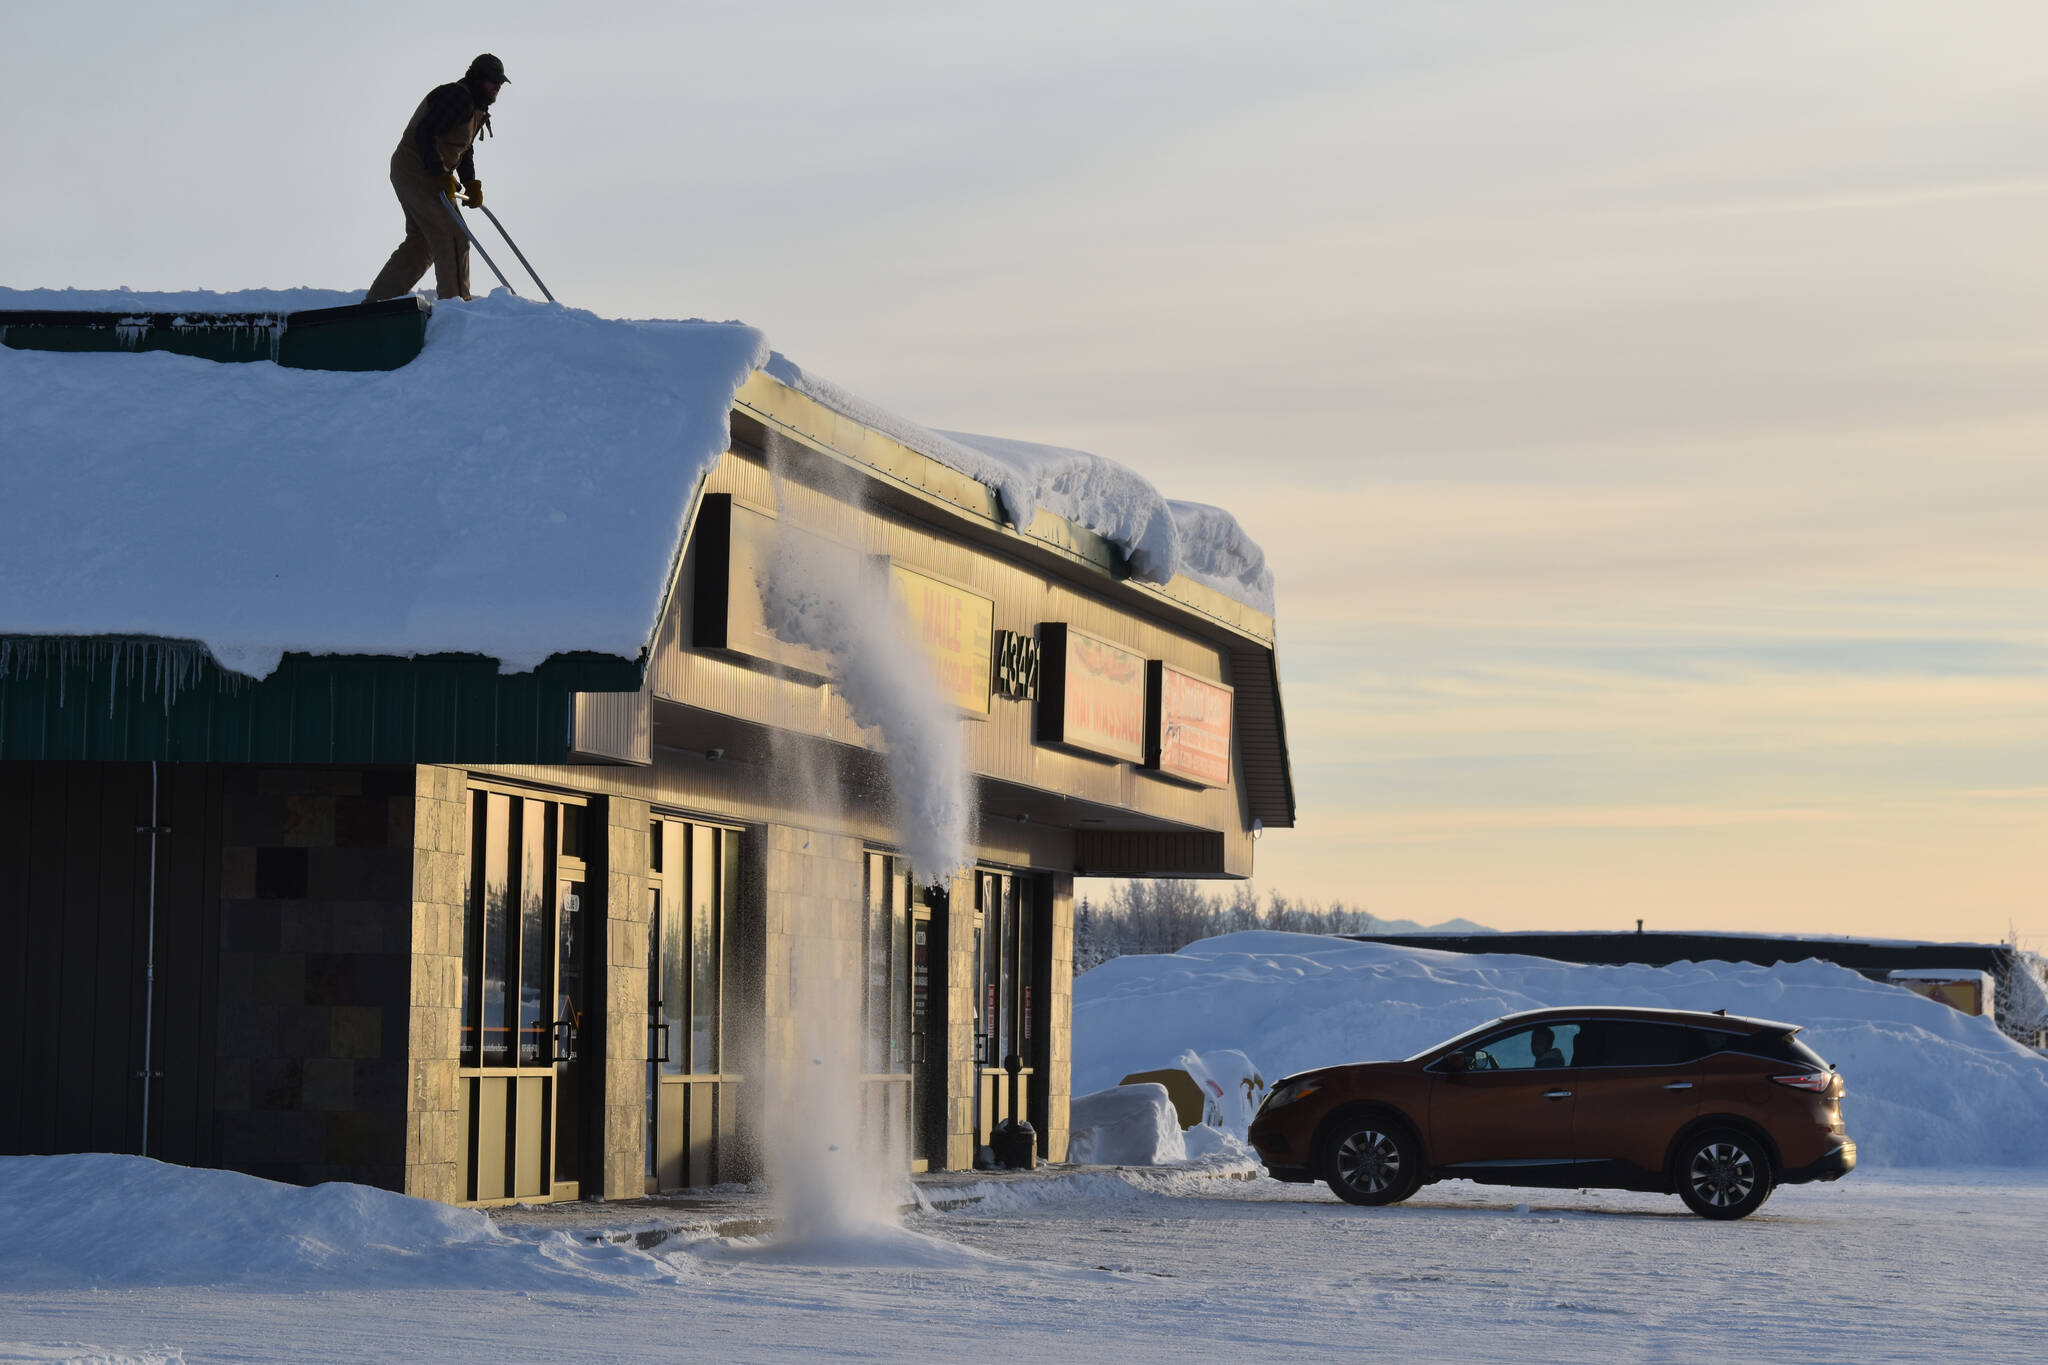 Snow is cleared from a roof near the Copper Center Soldotna, Alaska on Friday, Dec. 16, 2022. Several nearby businesses were closed after a roof collapse. (Jake Dye/Peninsula Clarion)